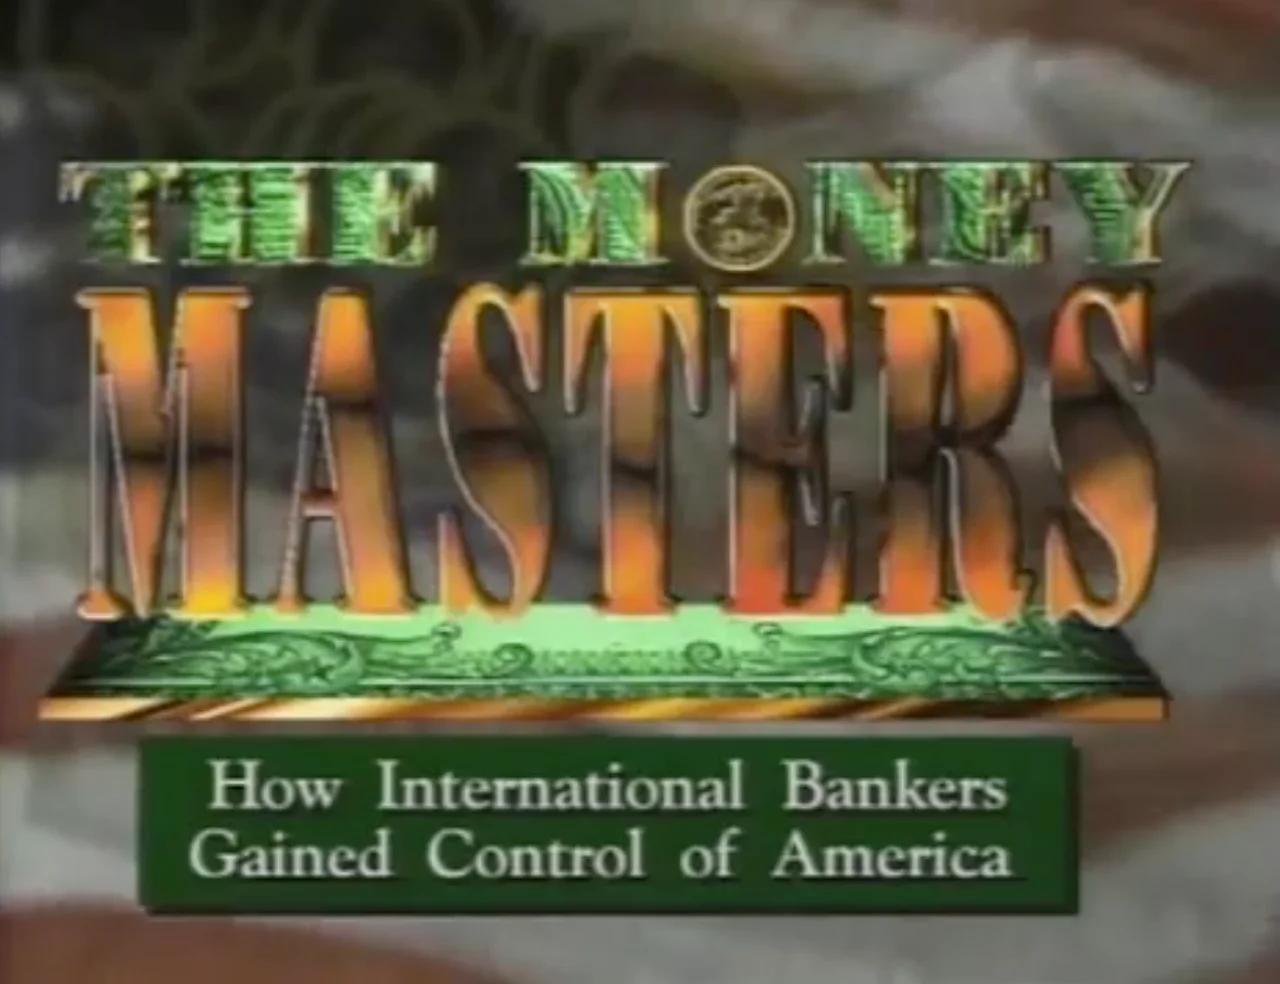 MONEY MASTERS.POSTER